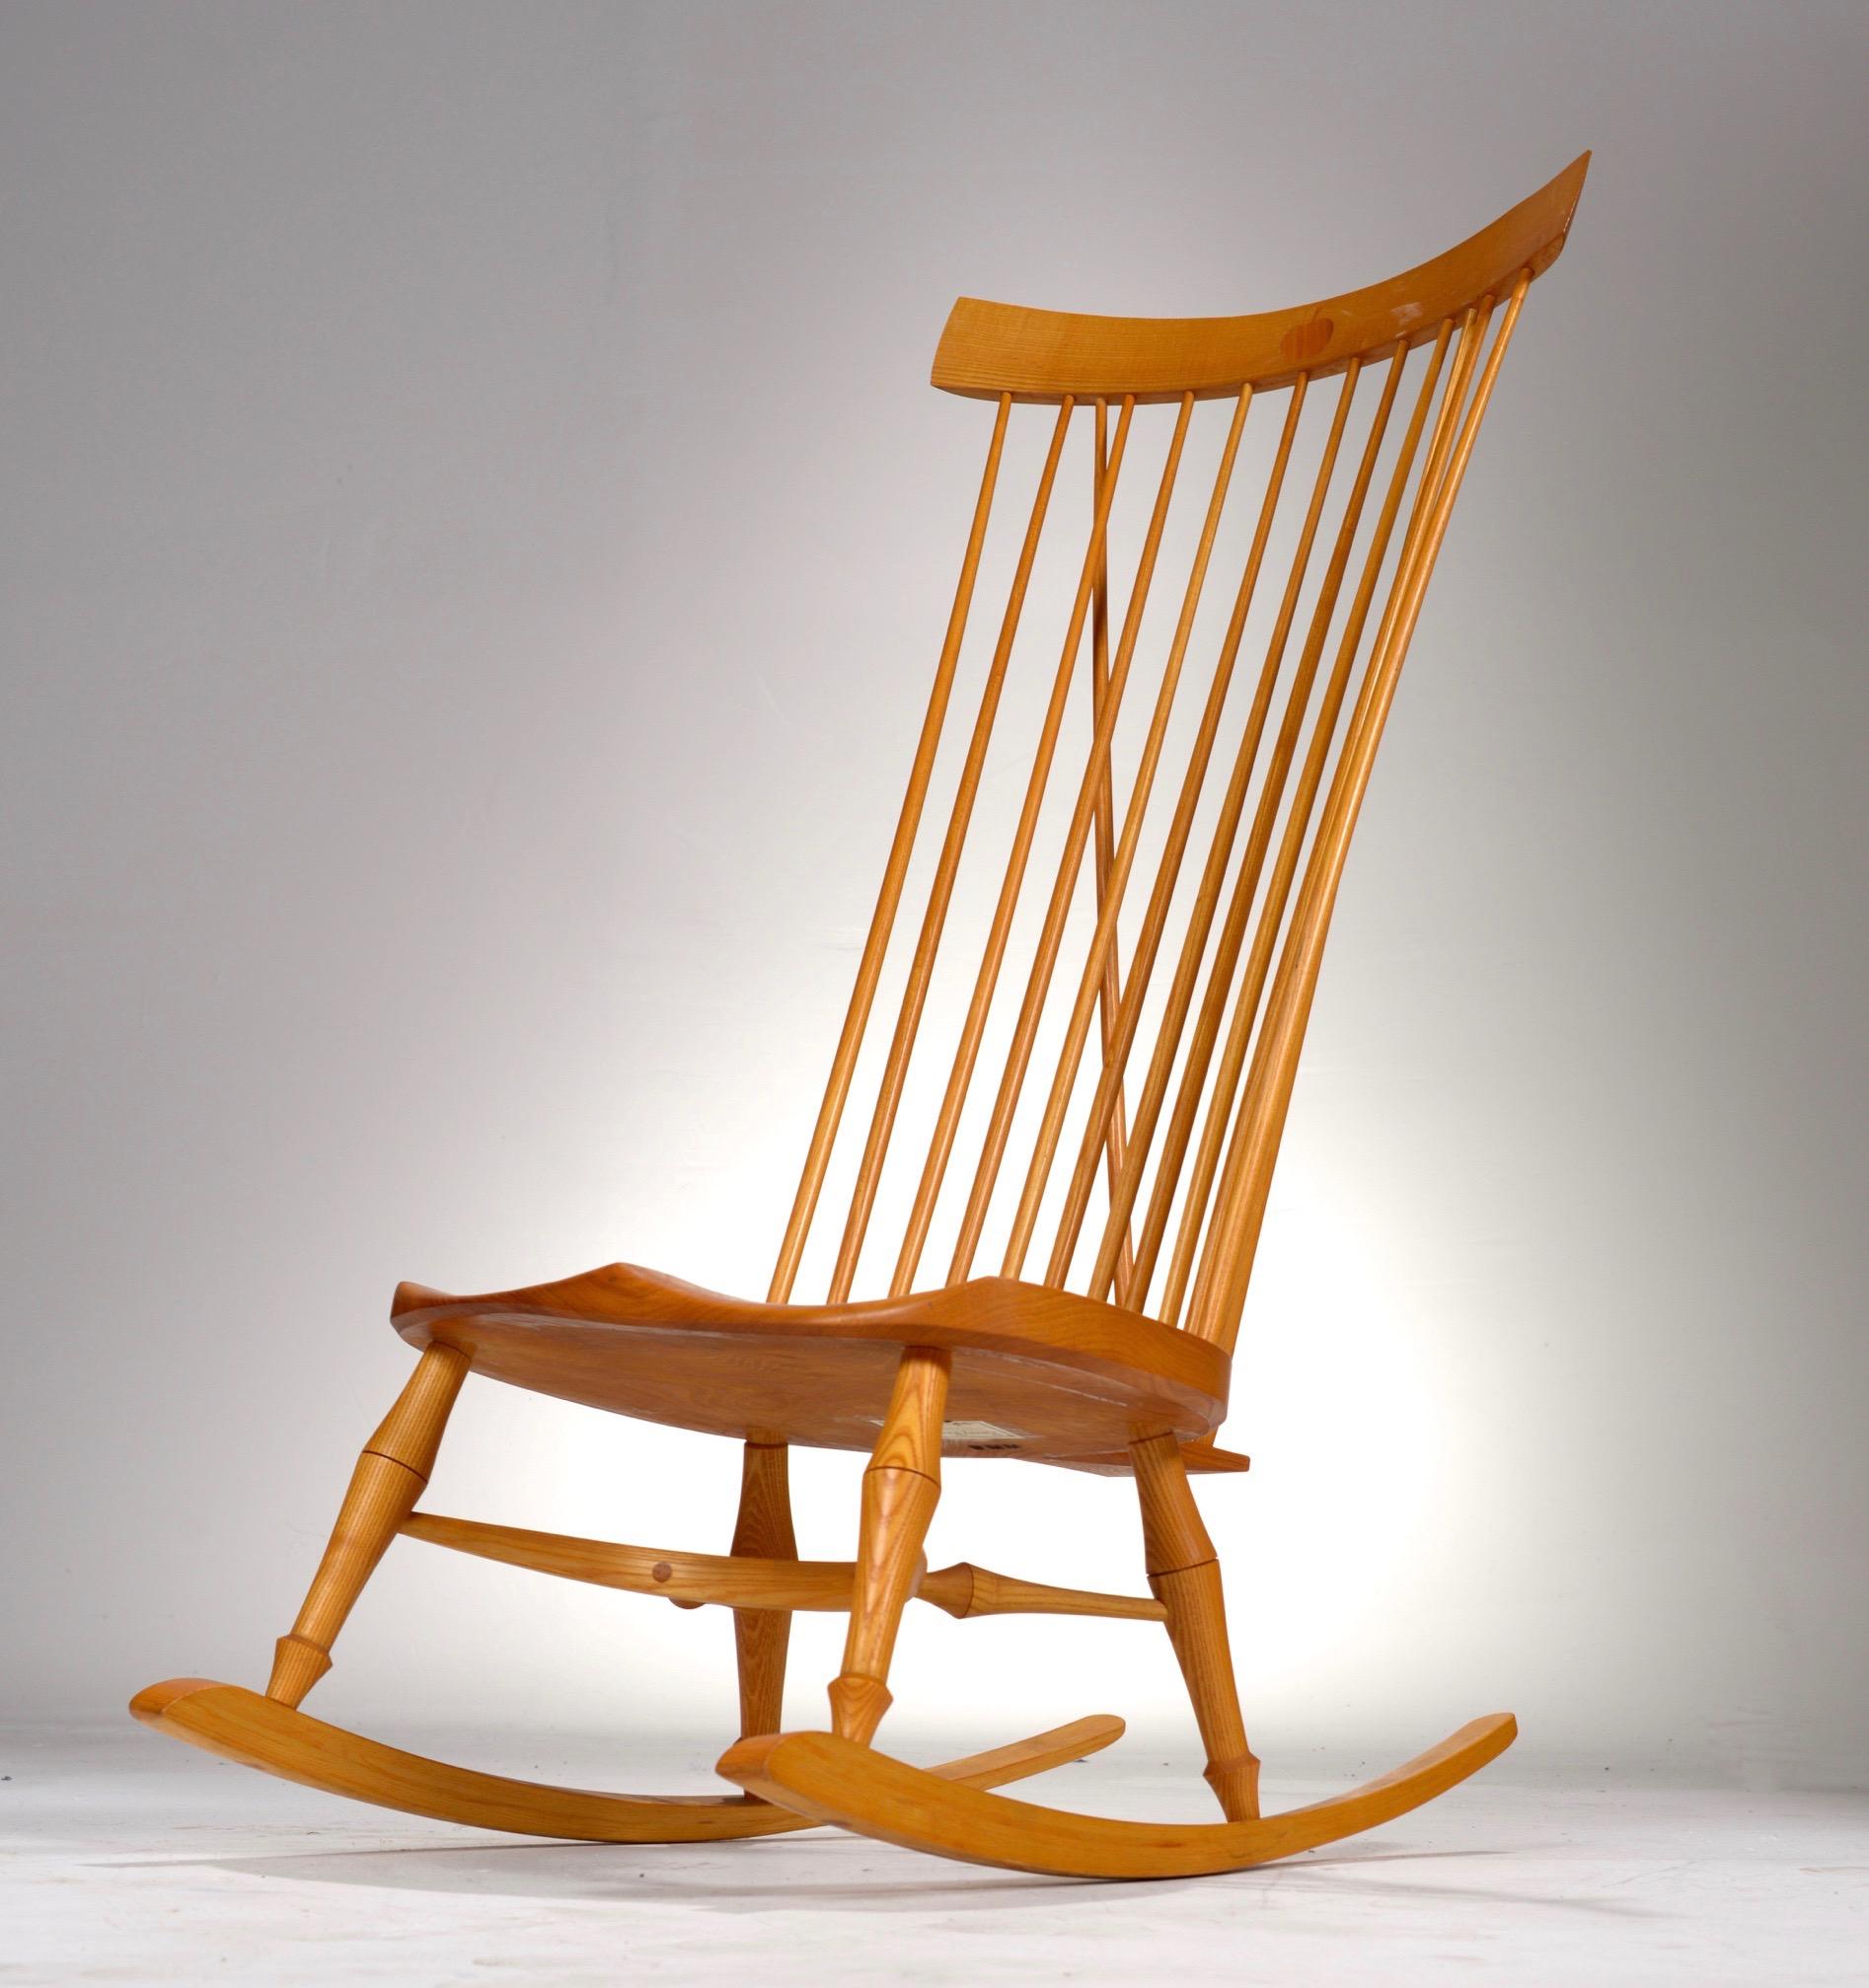 Comfortable and lightweight rocker in ash and elm with v-back support and inlayed apple detail. Made in the 1980s by Barry Michael Murphy out of Windmill Hill in East Sussex, England.

This amazing rocker is viewable at our Los Angeles Arts District